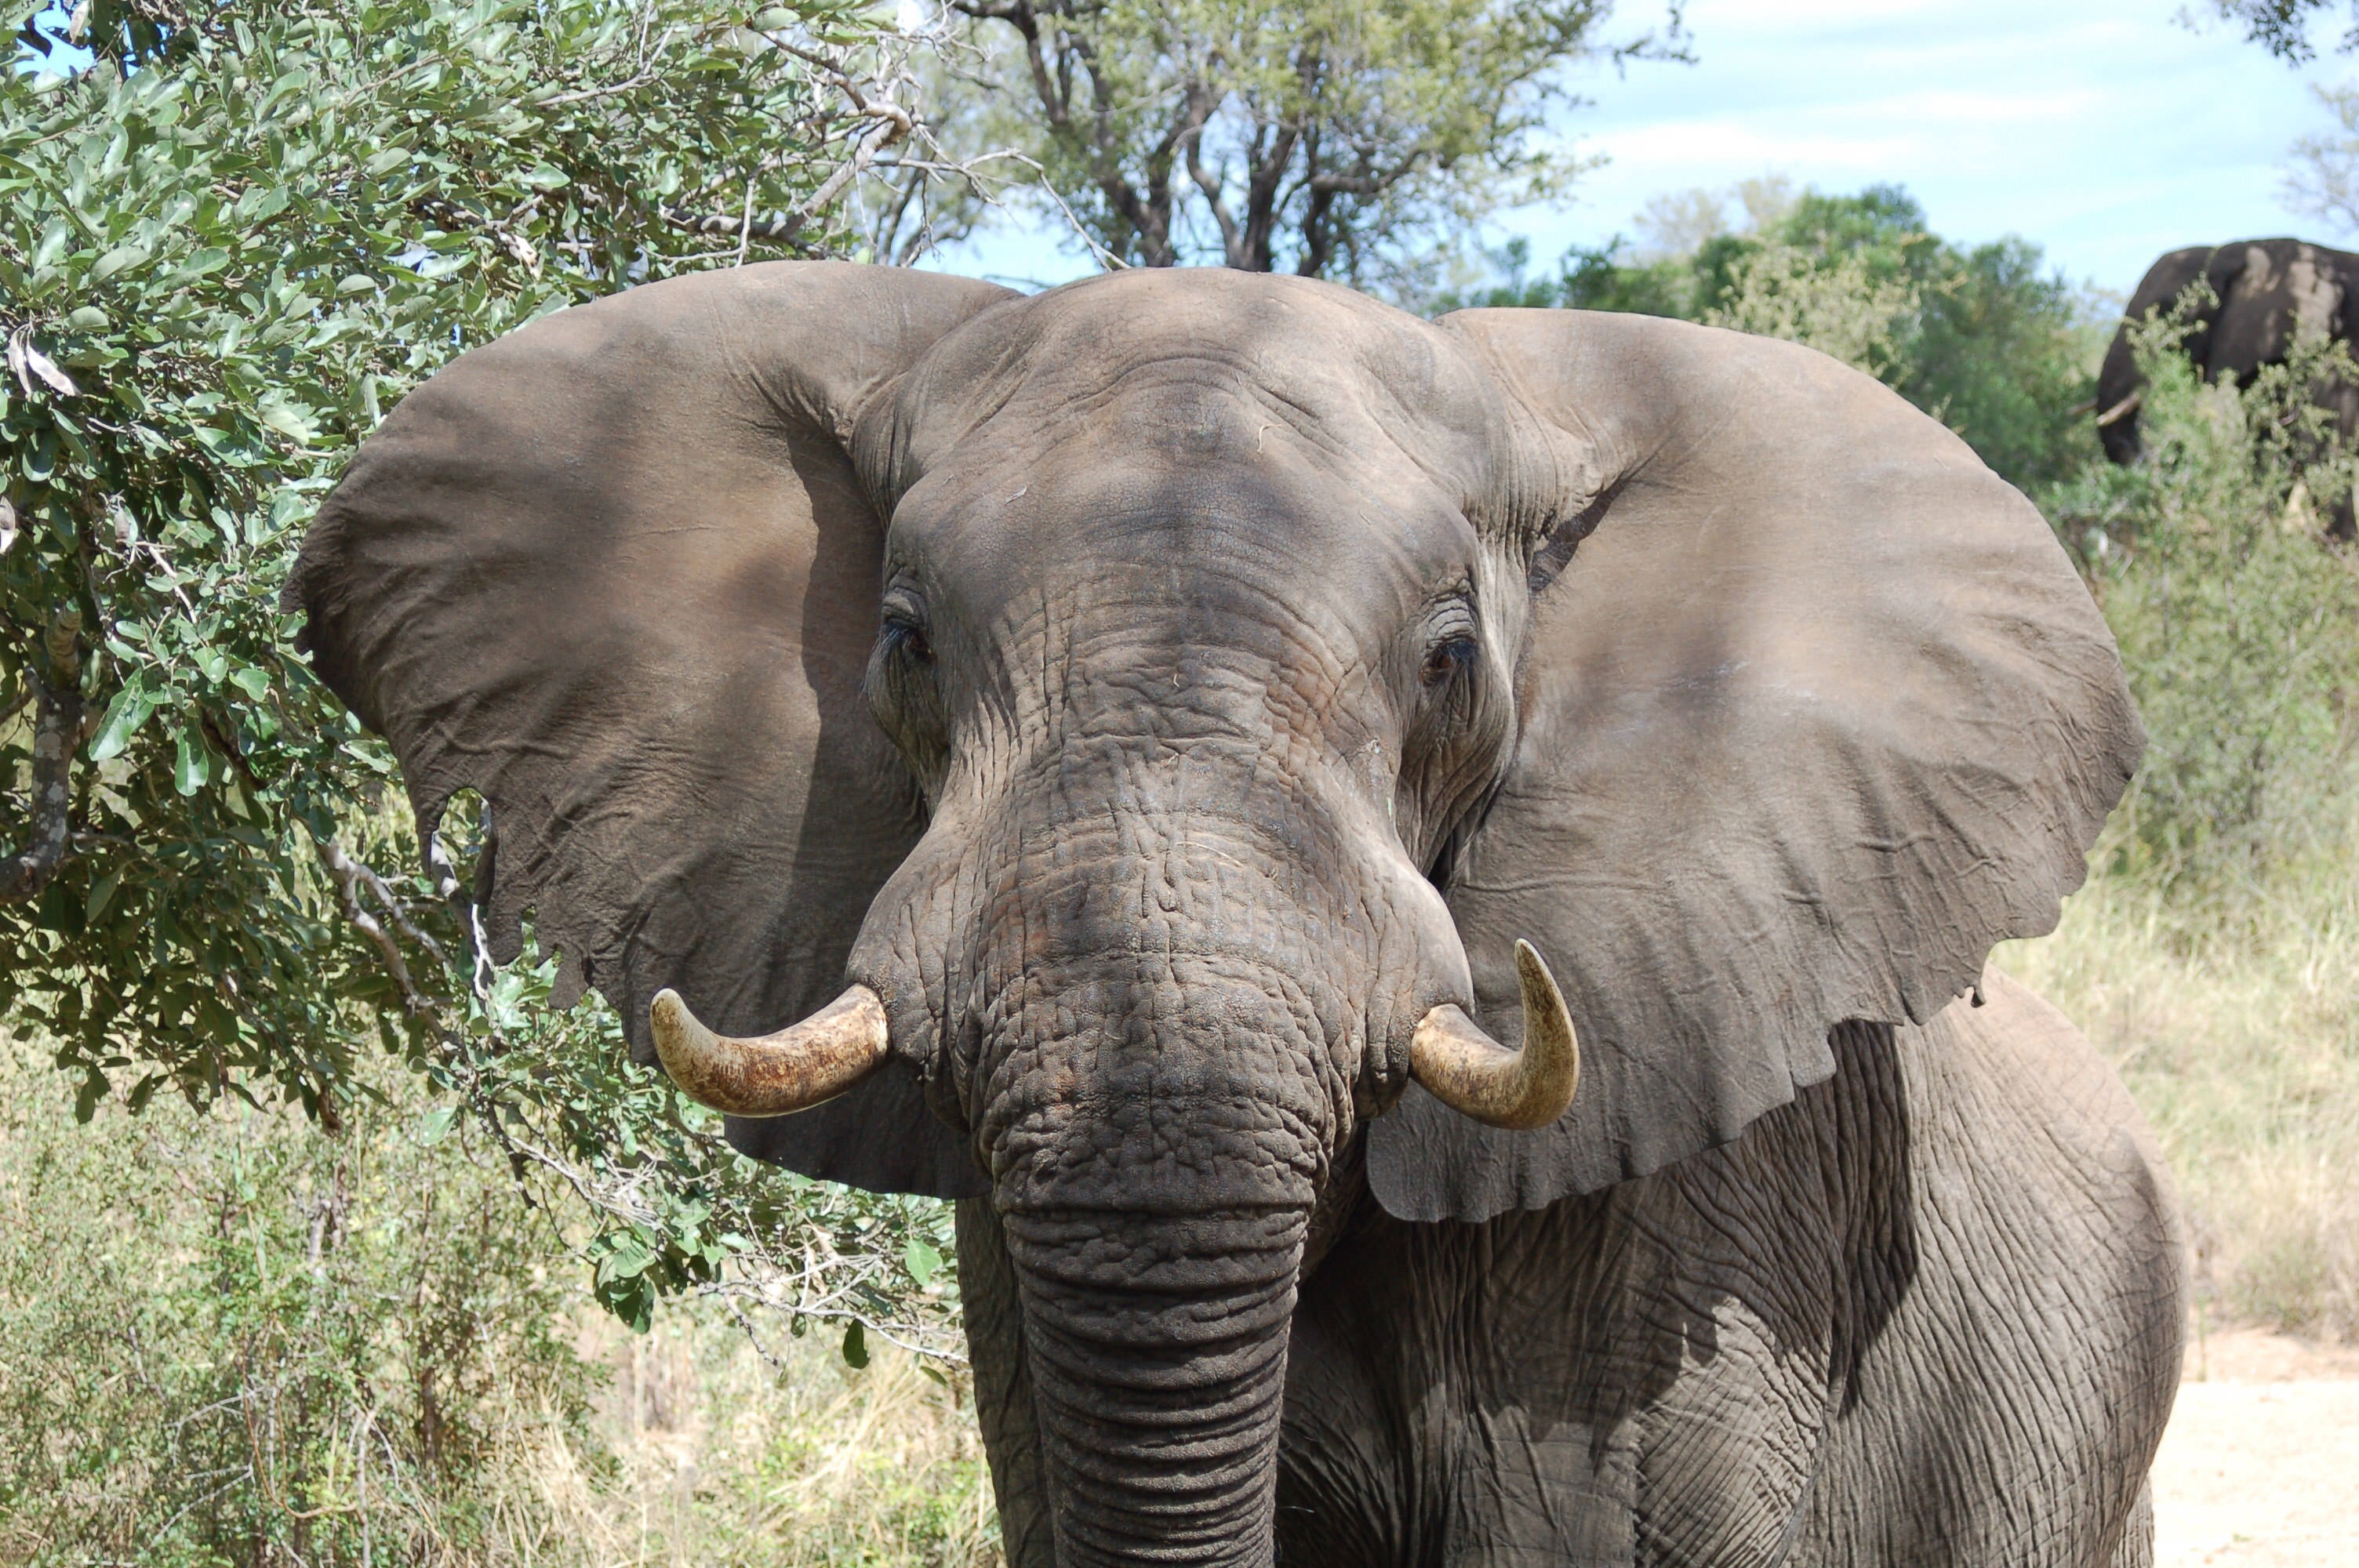 A mature bull elephant in South Africa looks at the camera.